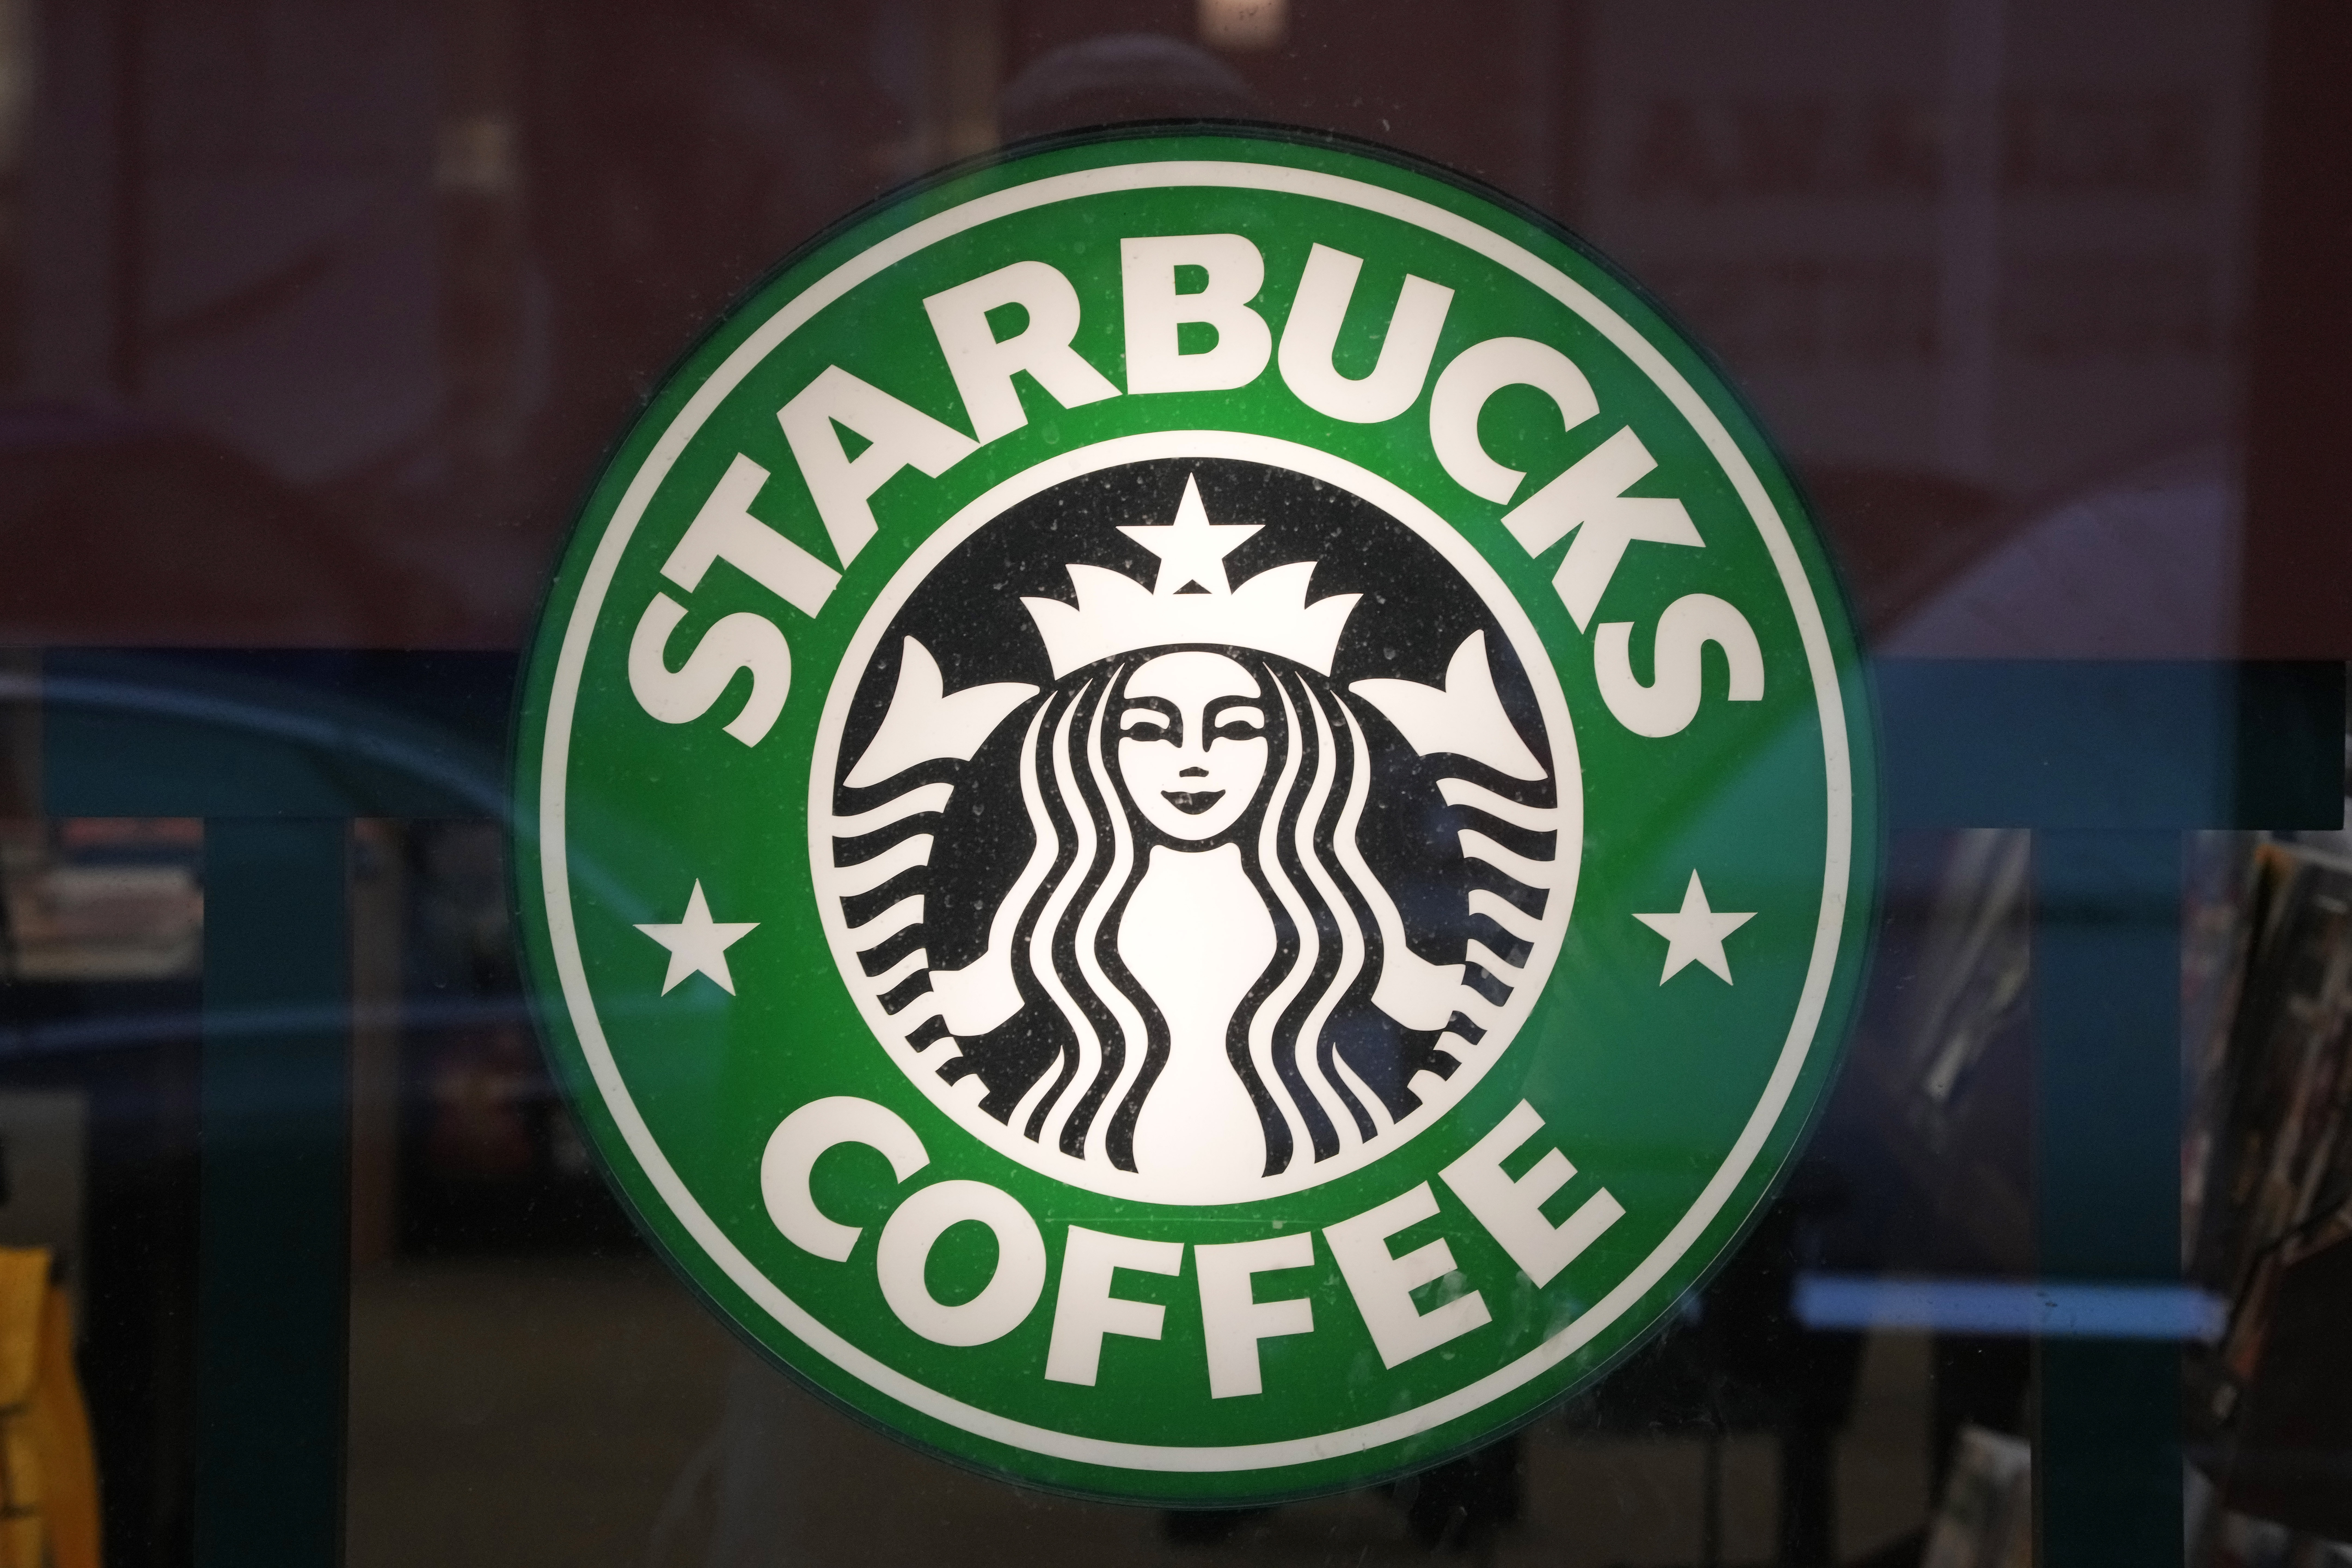 The Starbucks sign is displayed in the window of a Pittsburgh Starbucks, Jan. 30, 2023. On Monday, June 12, jurors in a federal court in New Jersey awarded $25.6 million to a former regional Starbucks manager who alleged that she and other white employees were unfairly punished by the coffee chain after the high-profile 2018 arrests of two Black men at one of the chain's Philadelphia locations. Photo credit: Gene J. Puskar, The Associated Press